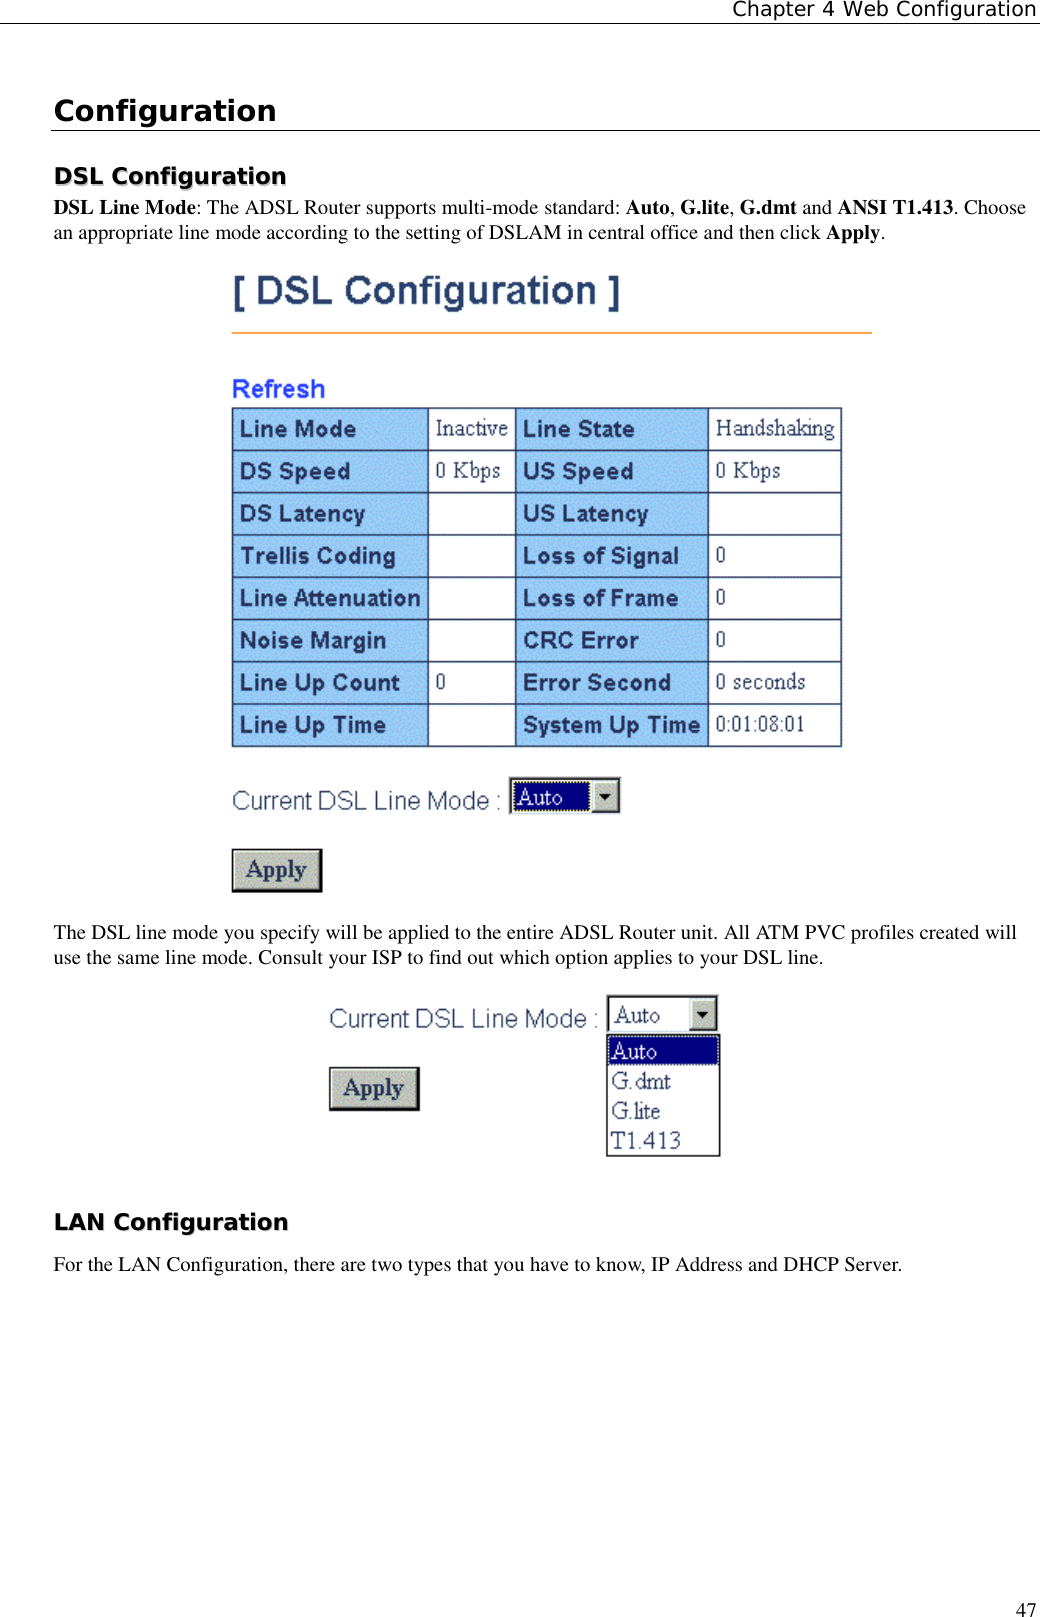 Chapter 4 Web Configuration47ConfigurationDDSSLL  CCoonnffiigguurraattiioonnDSL Line Mode: The ADSL Router supports multi-mode standard: Auto, G.lite, G.dmt and ANSI T1.413. Choosean appropriate line mode according to the setting of DSLAM in central office and then click Apply.The DSL line mode you specify will be applied to the entire ADSL Router unit. All ATM PVC profiles created willuse the same line mode. Consult your ISP to find out which option applies to your DSL line.LLAANN  CCoonnffiigguurraattiioonnFor the LAN Configuration, there are two types that you have to know, IP Address and DHCP Server.